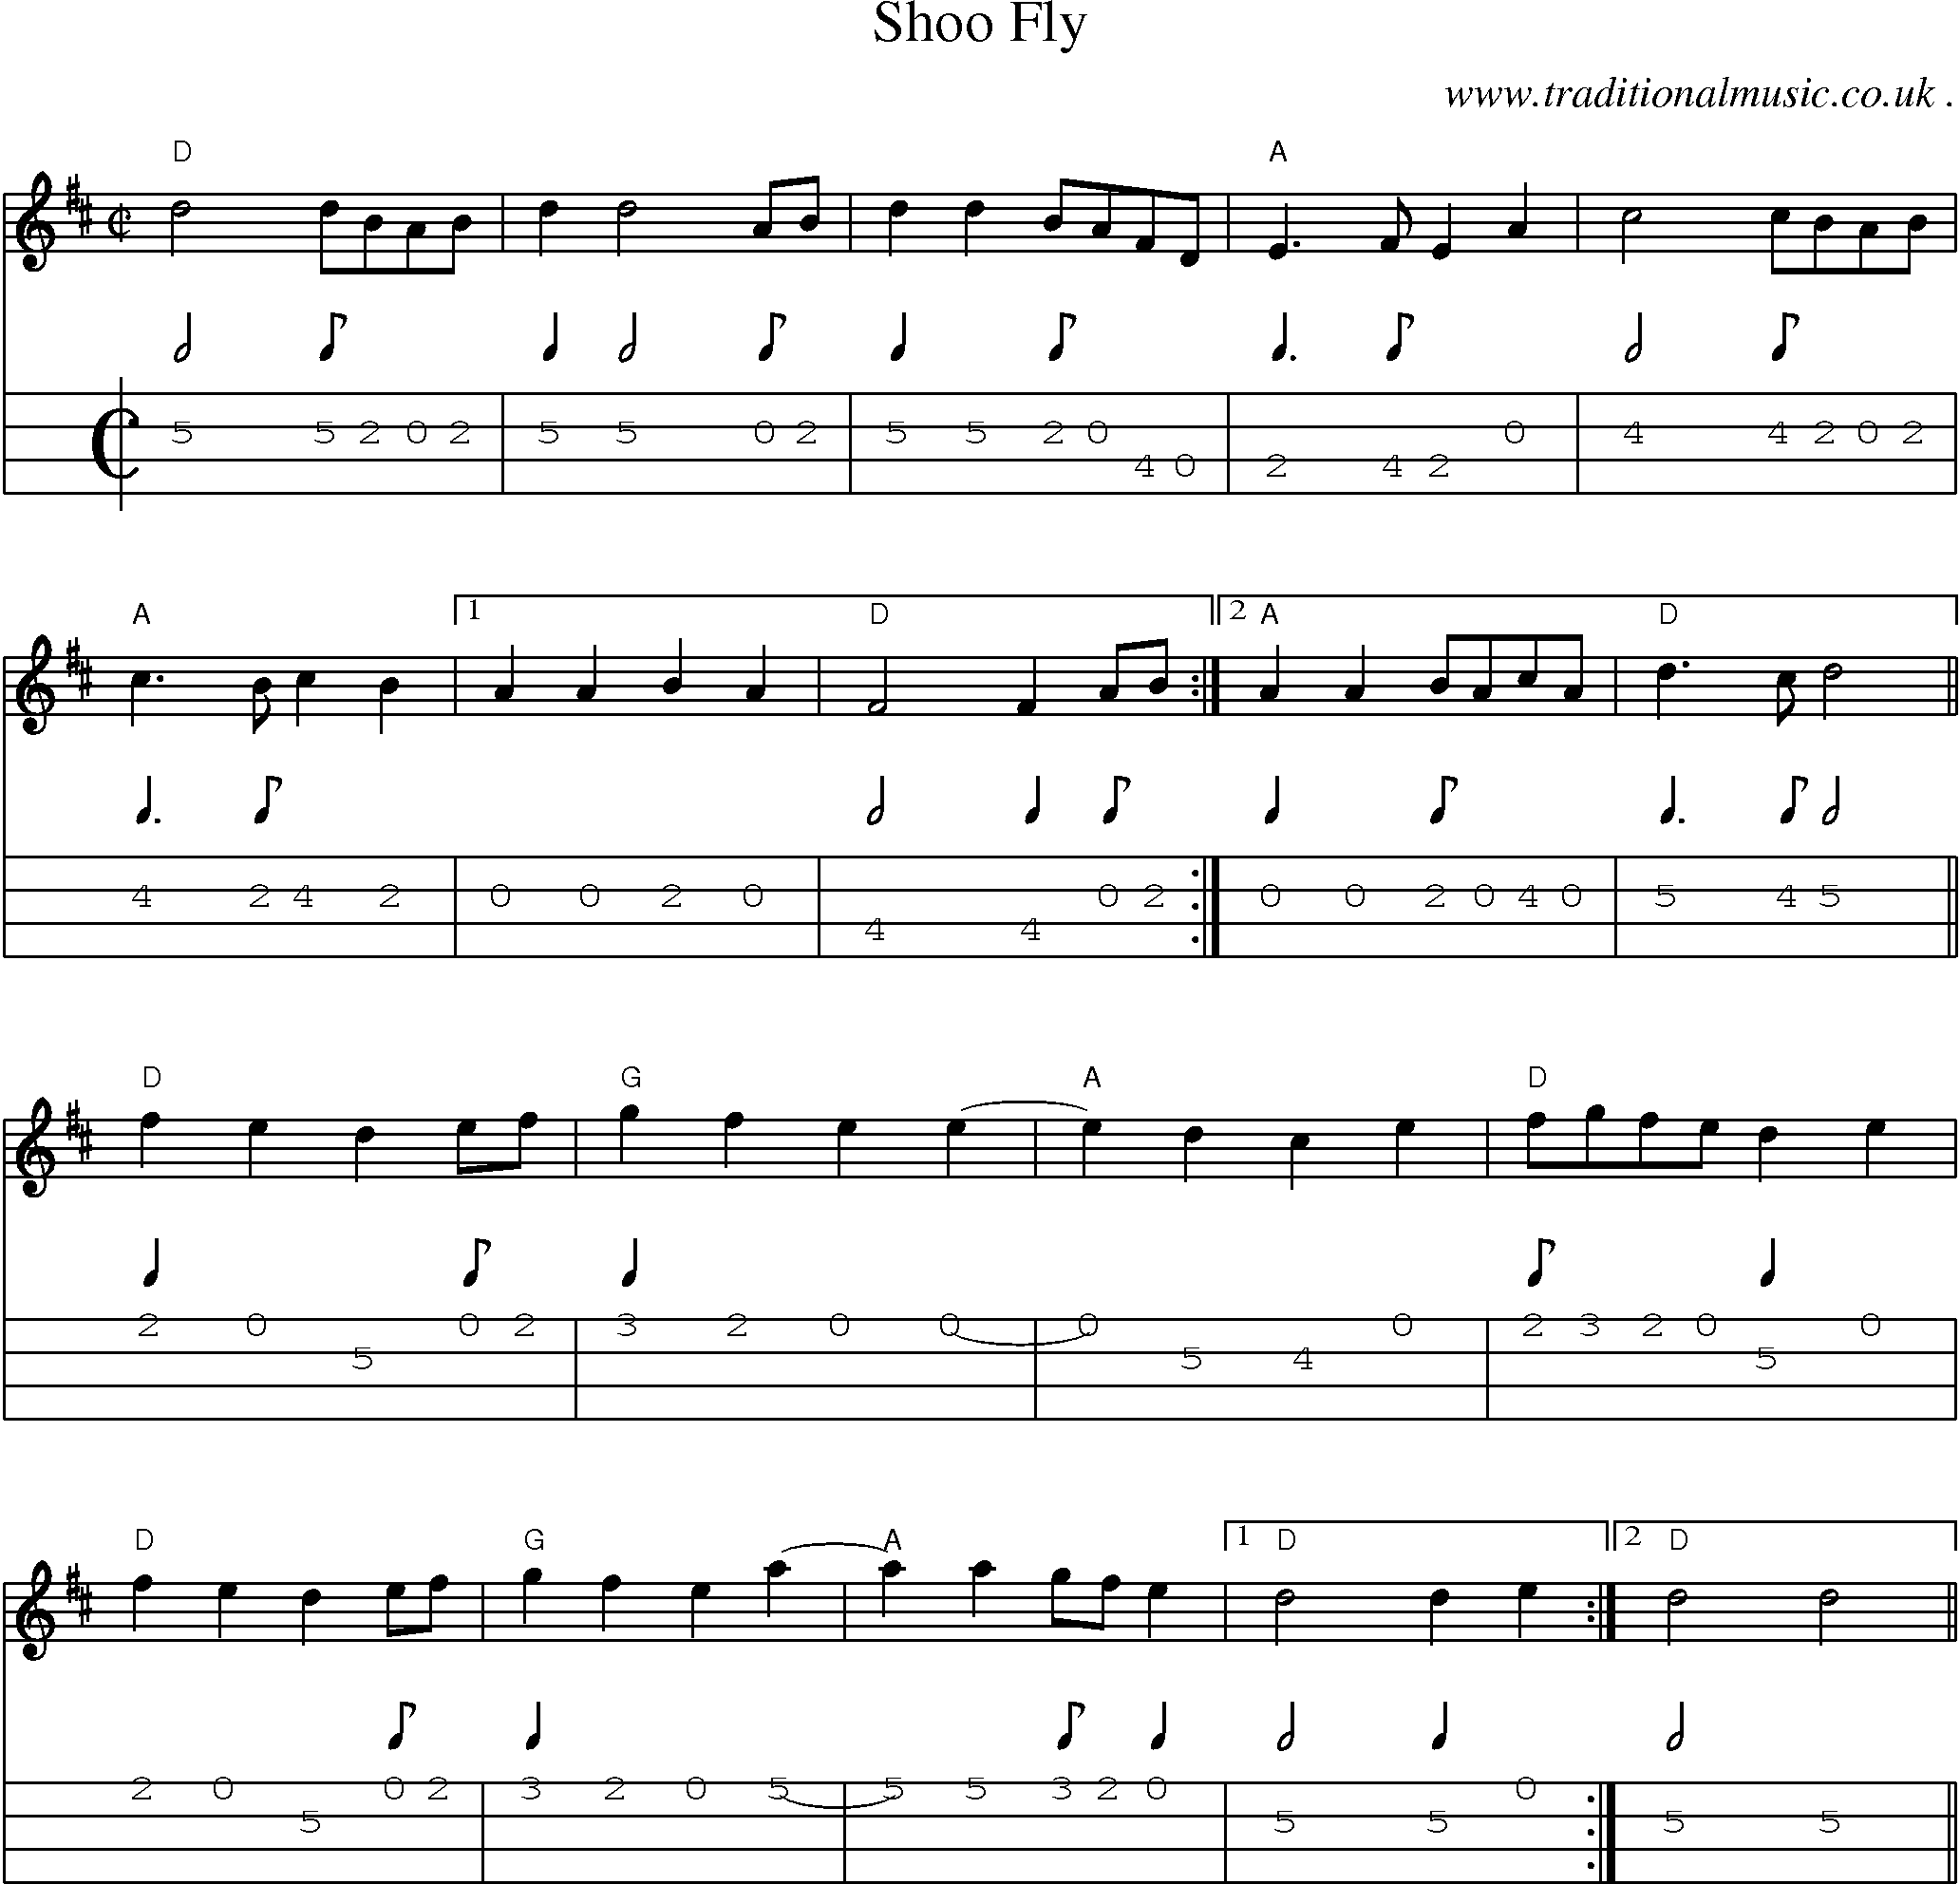 Music Score and Guitar Tabs for Shoo Fly